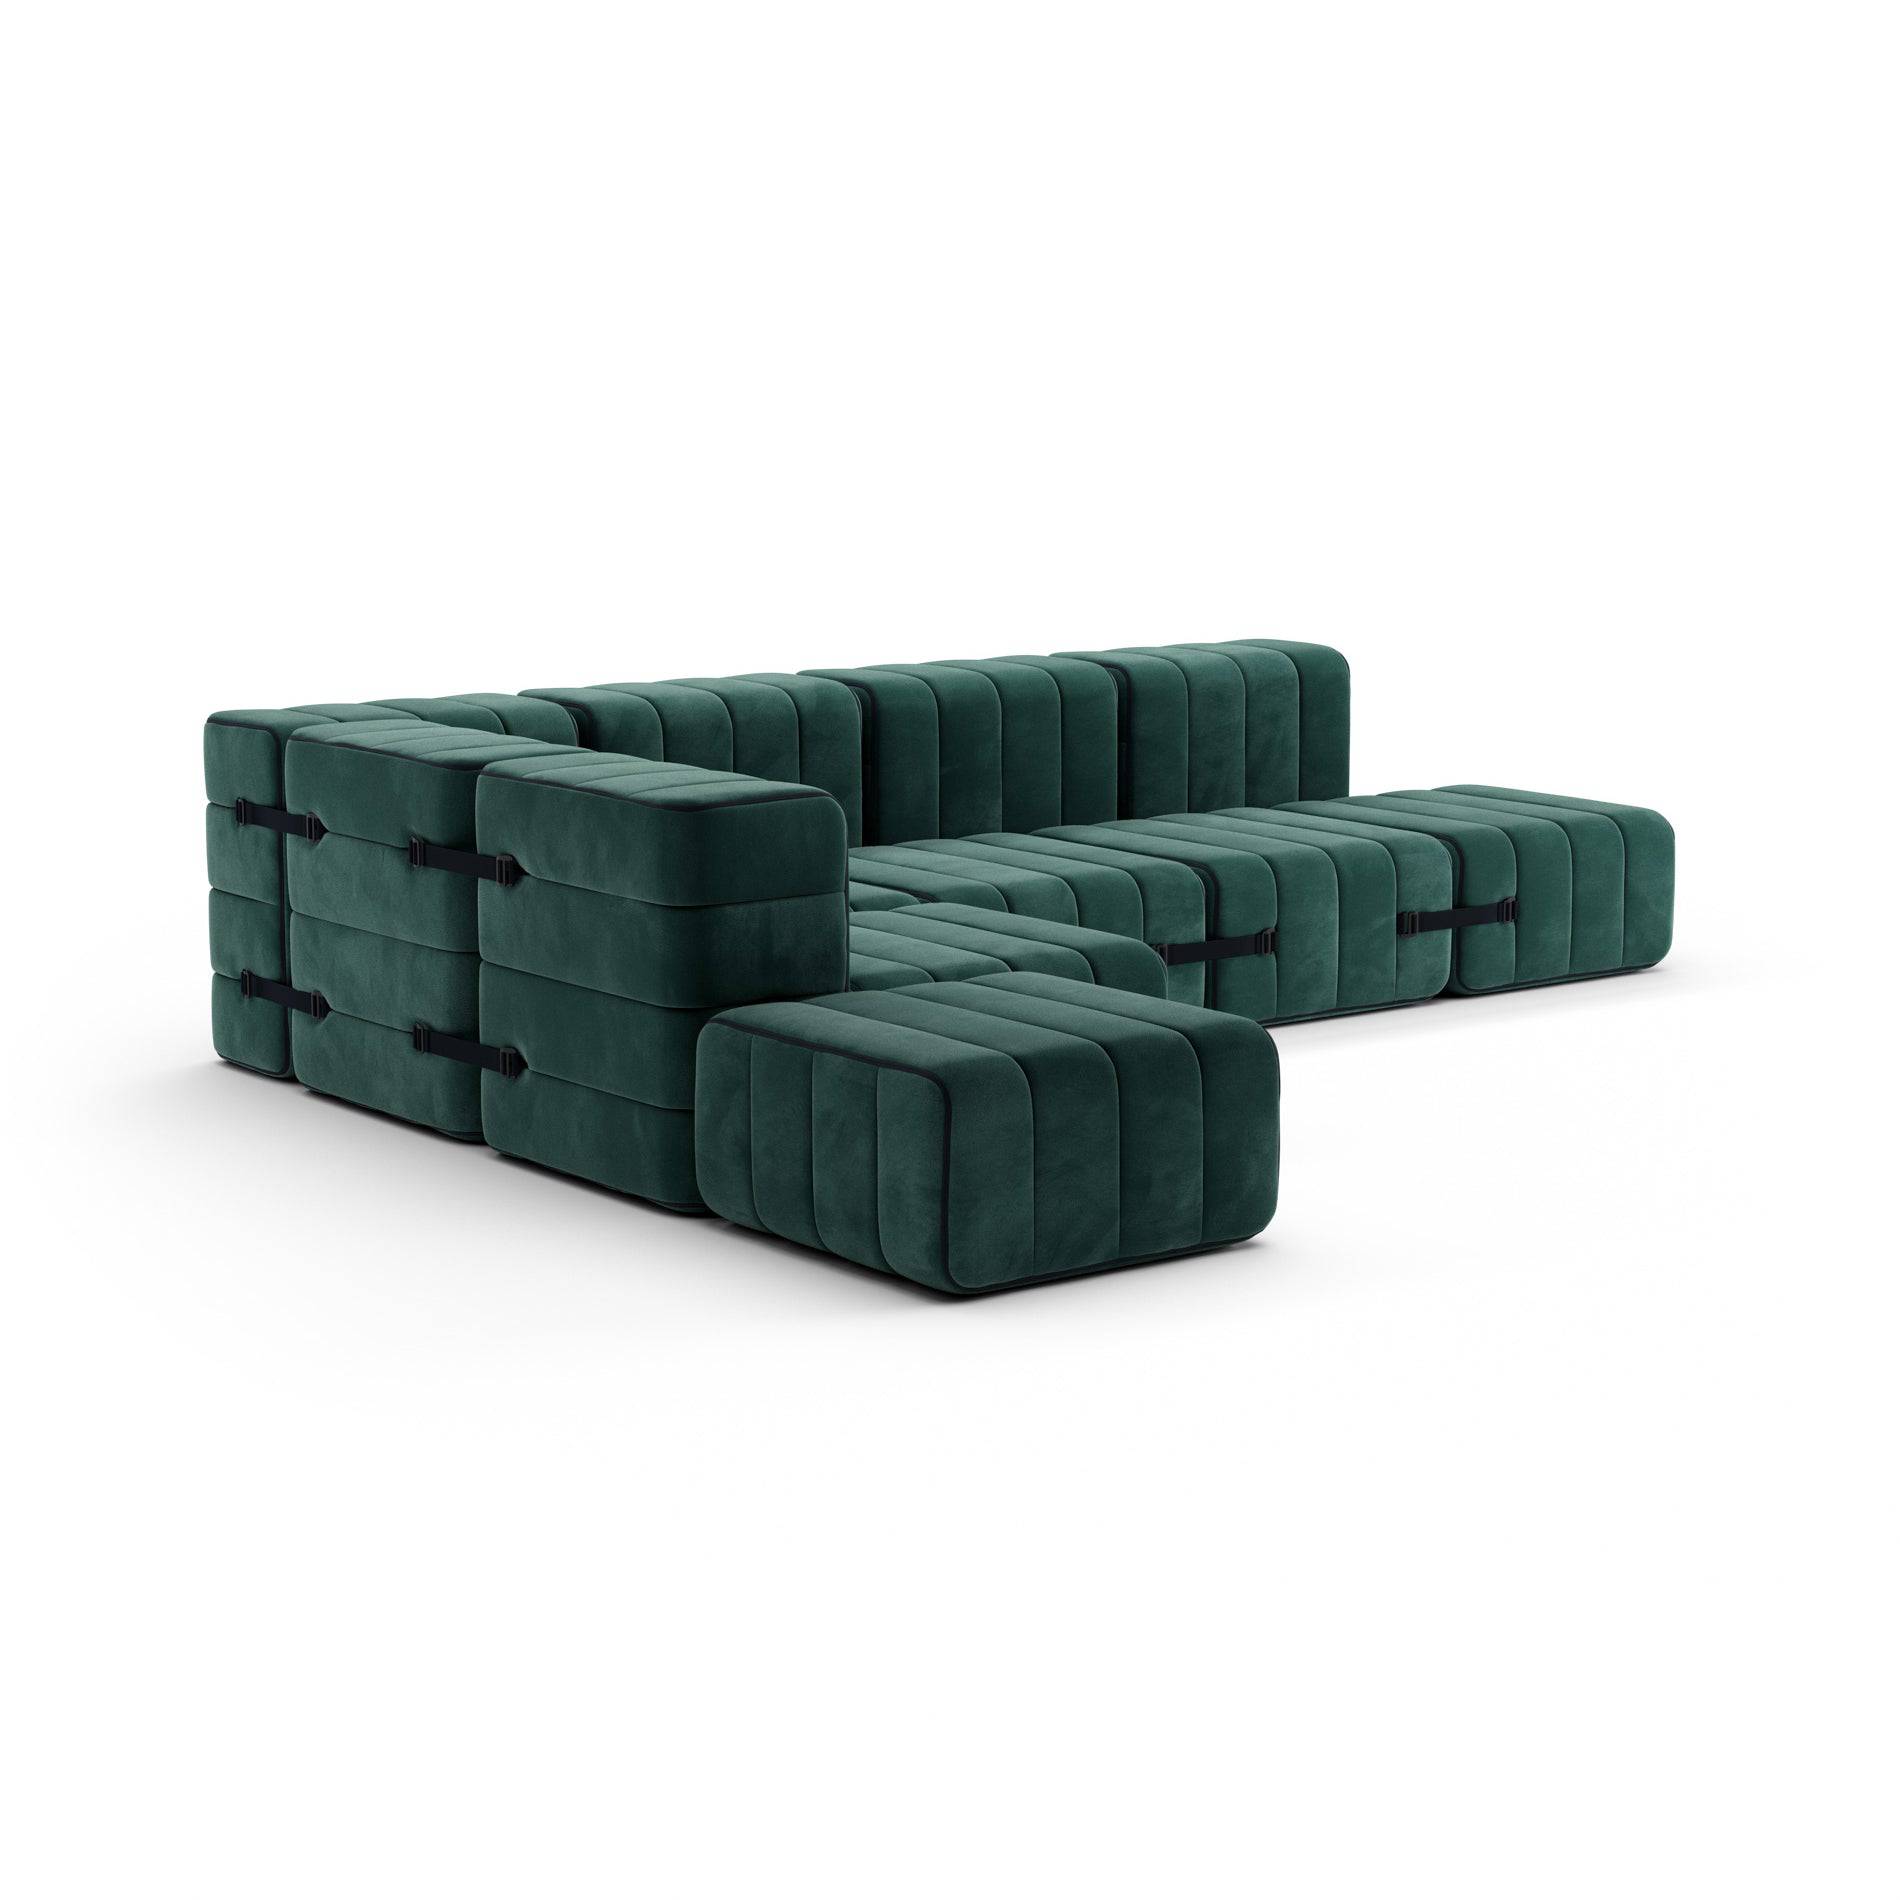 Curt Sofa System - Serpentine - THAT COOL LIVING